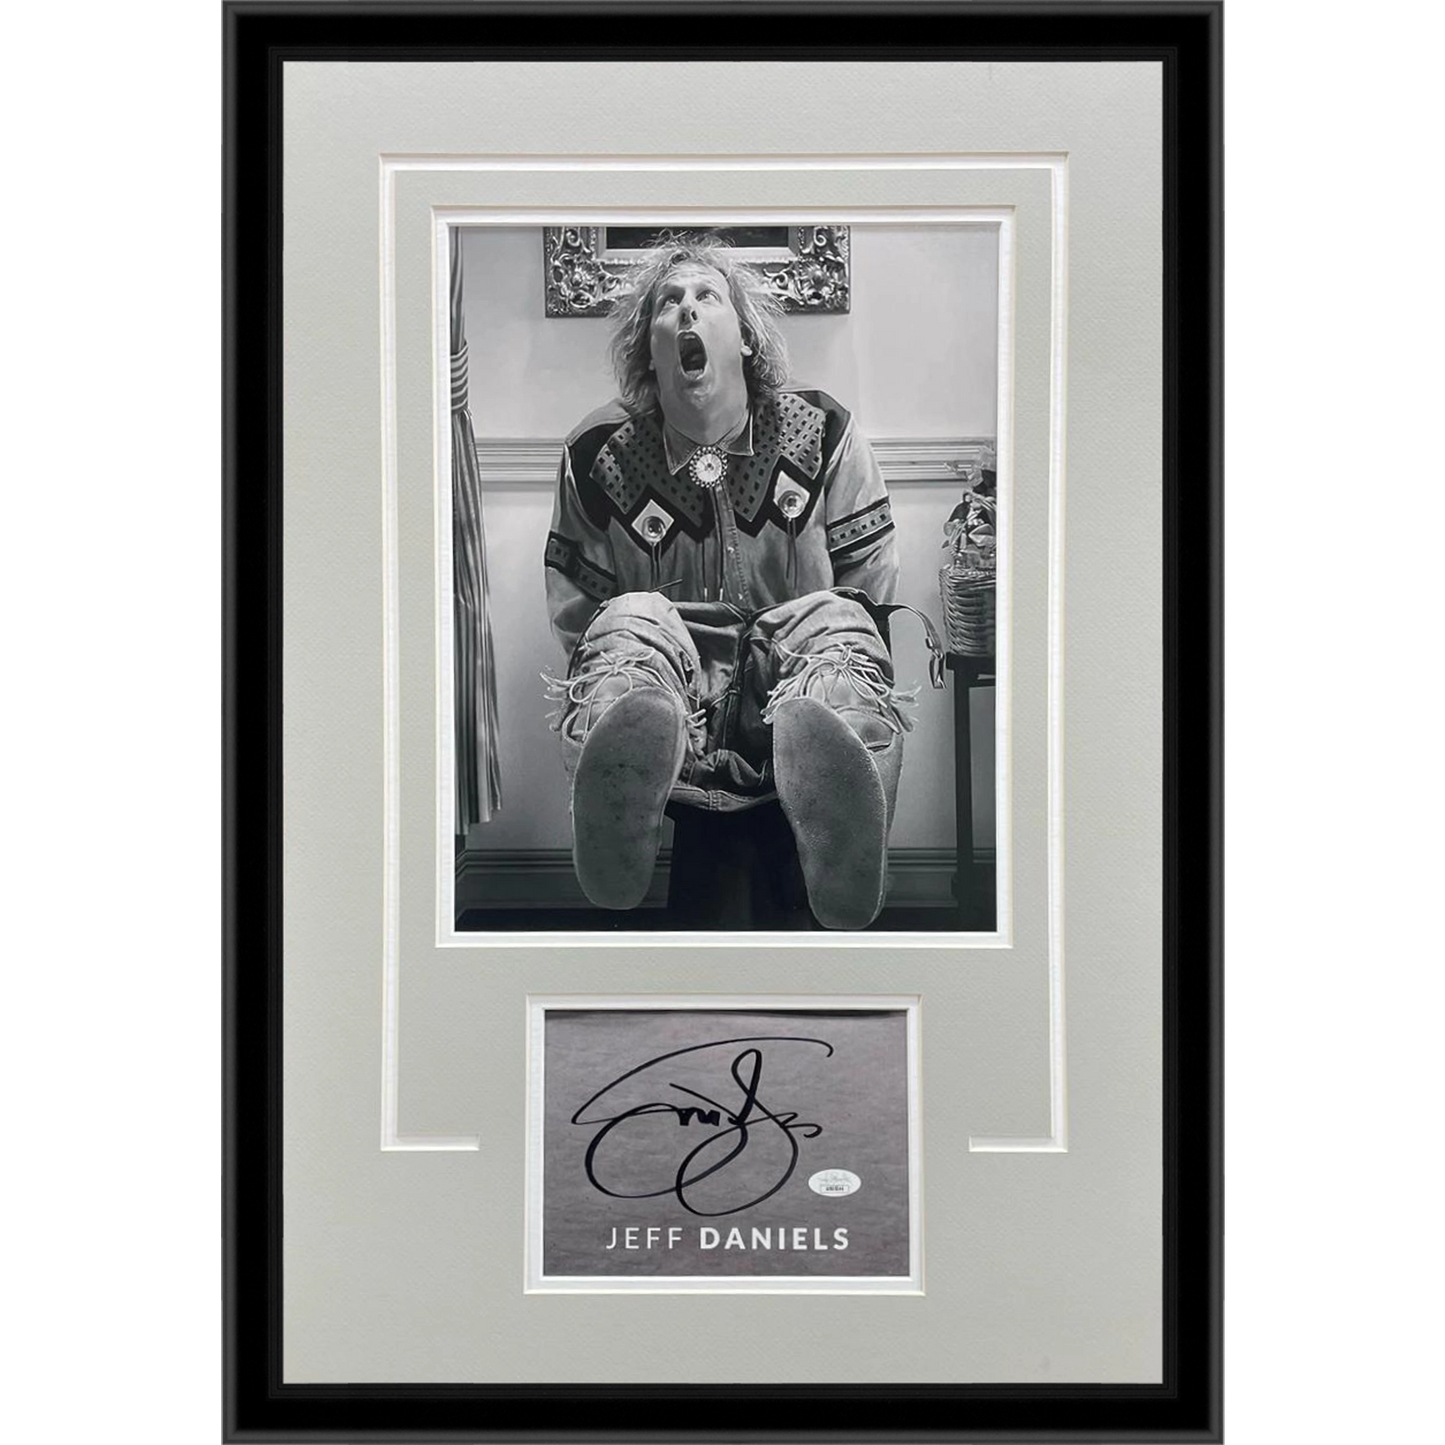 Jeff Daniels Autographed Dumb And Dumber (On Toilet Black and White) 11x14 Photo Signature Series Frame - JSA